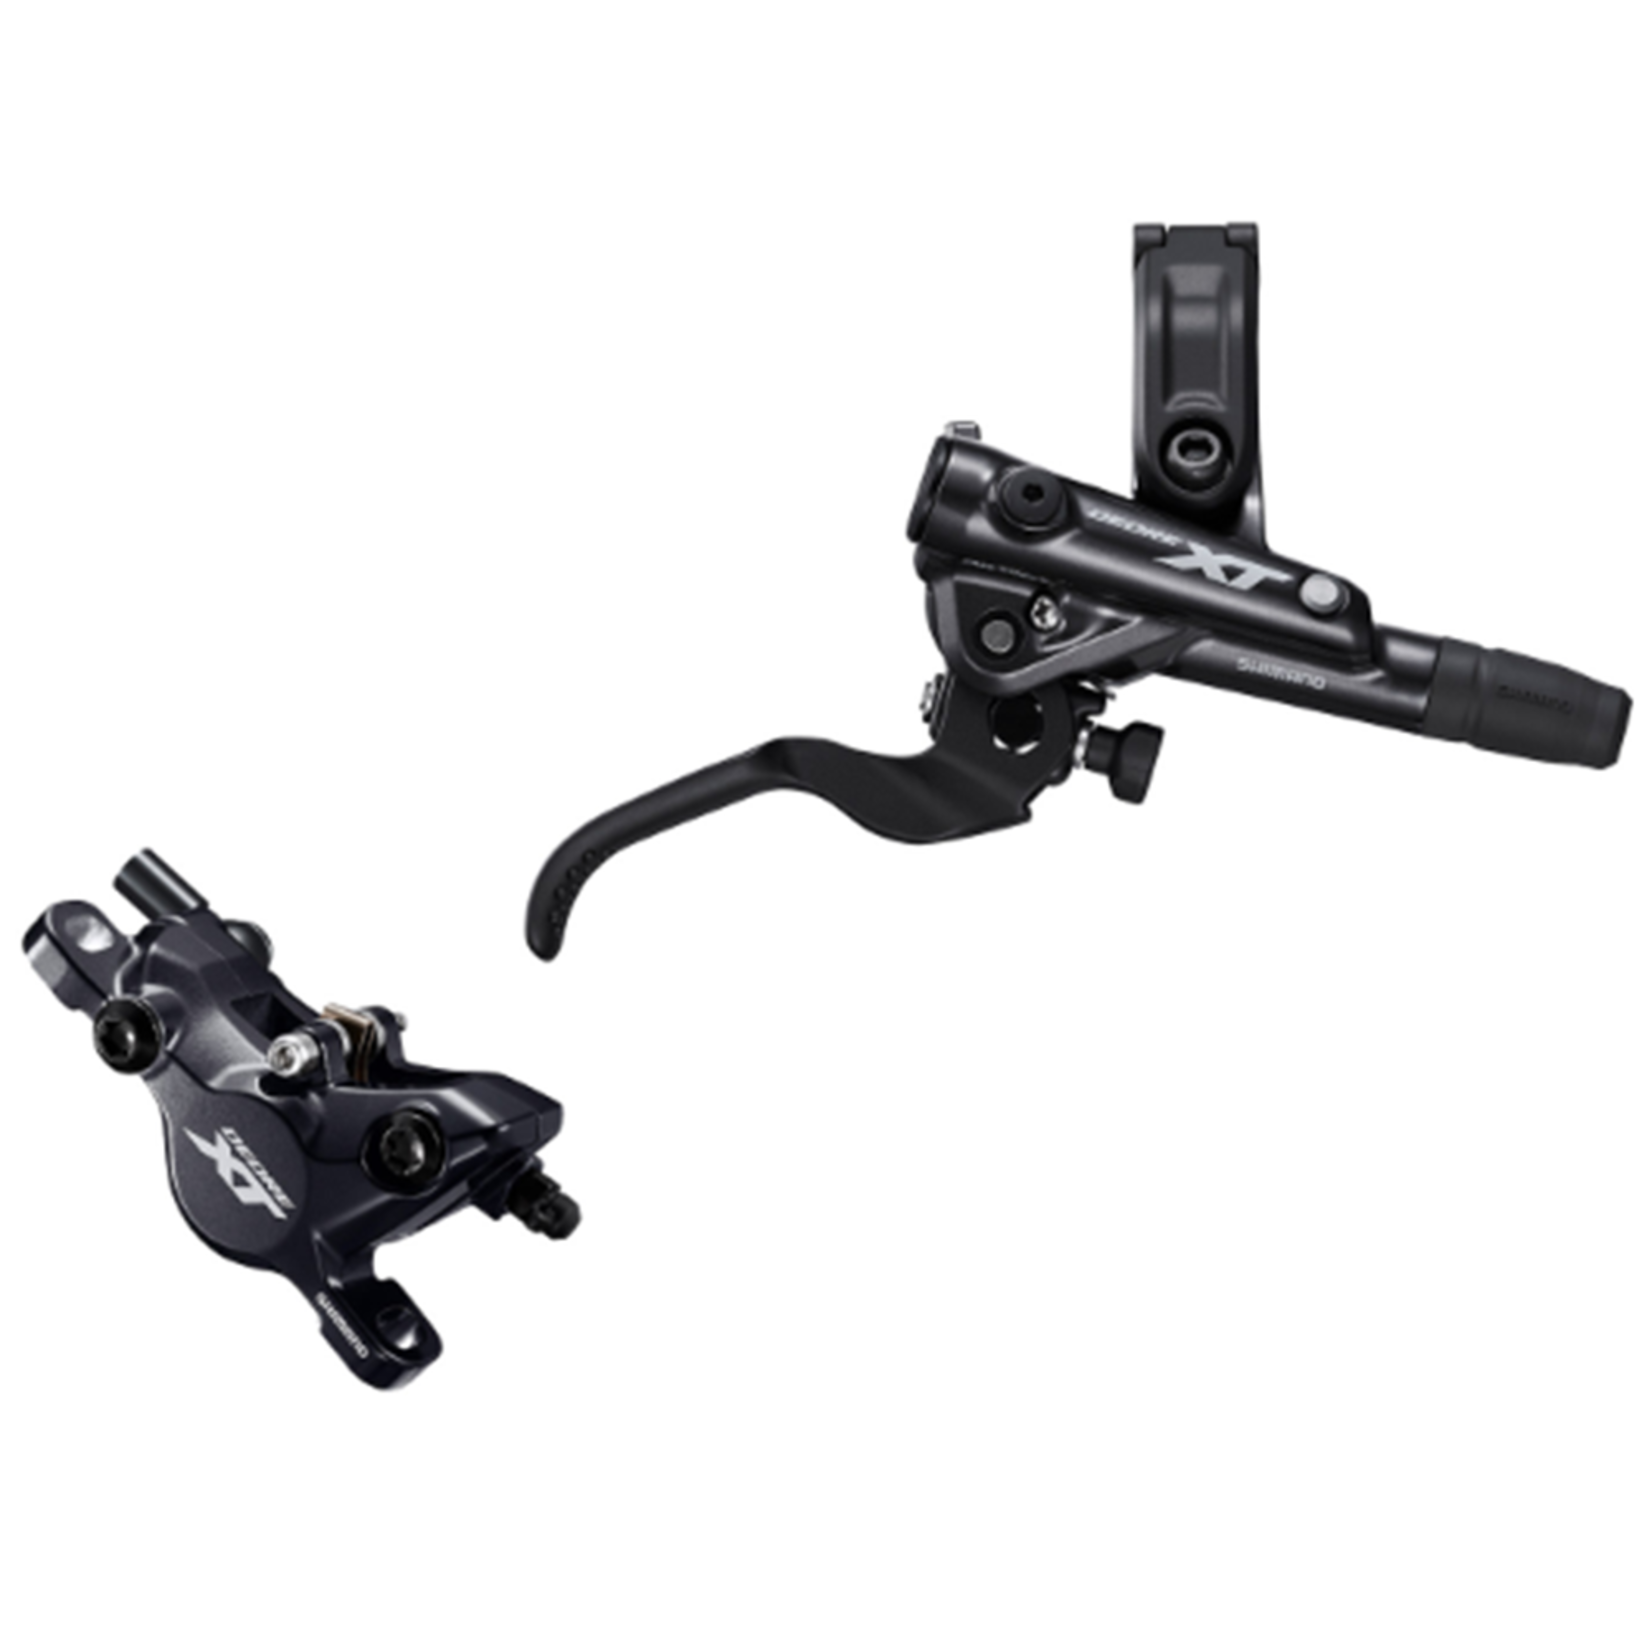 SHIMANO BR-M8100 FRONT DISC BRAKE XT RACE BL-M8100 RIGHT LEVER